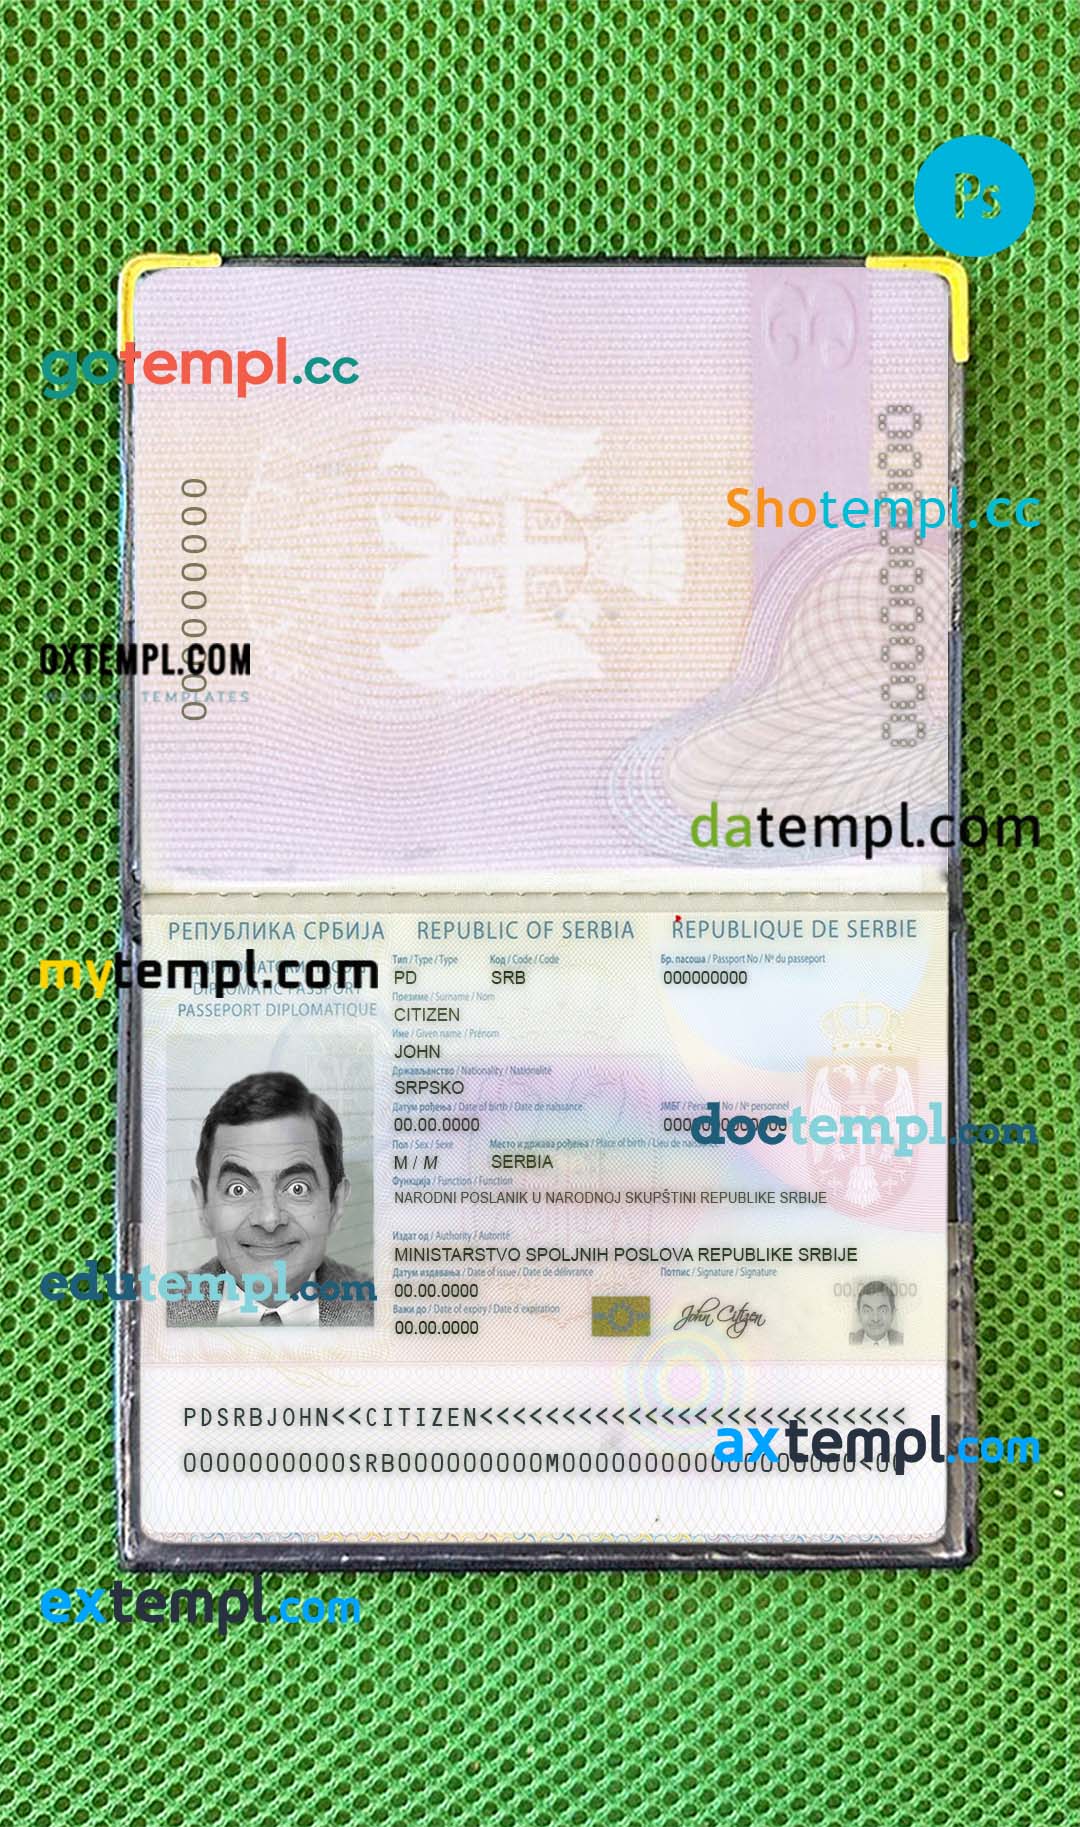 USA Texas state vertical driving license editable PSD template, under 21